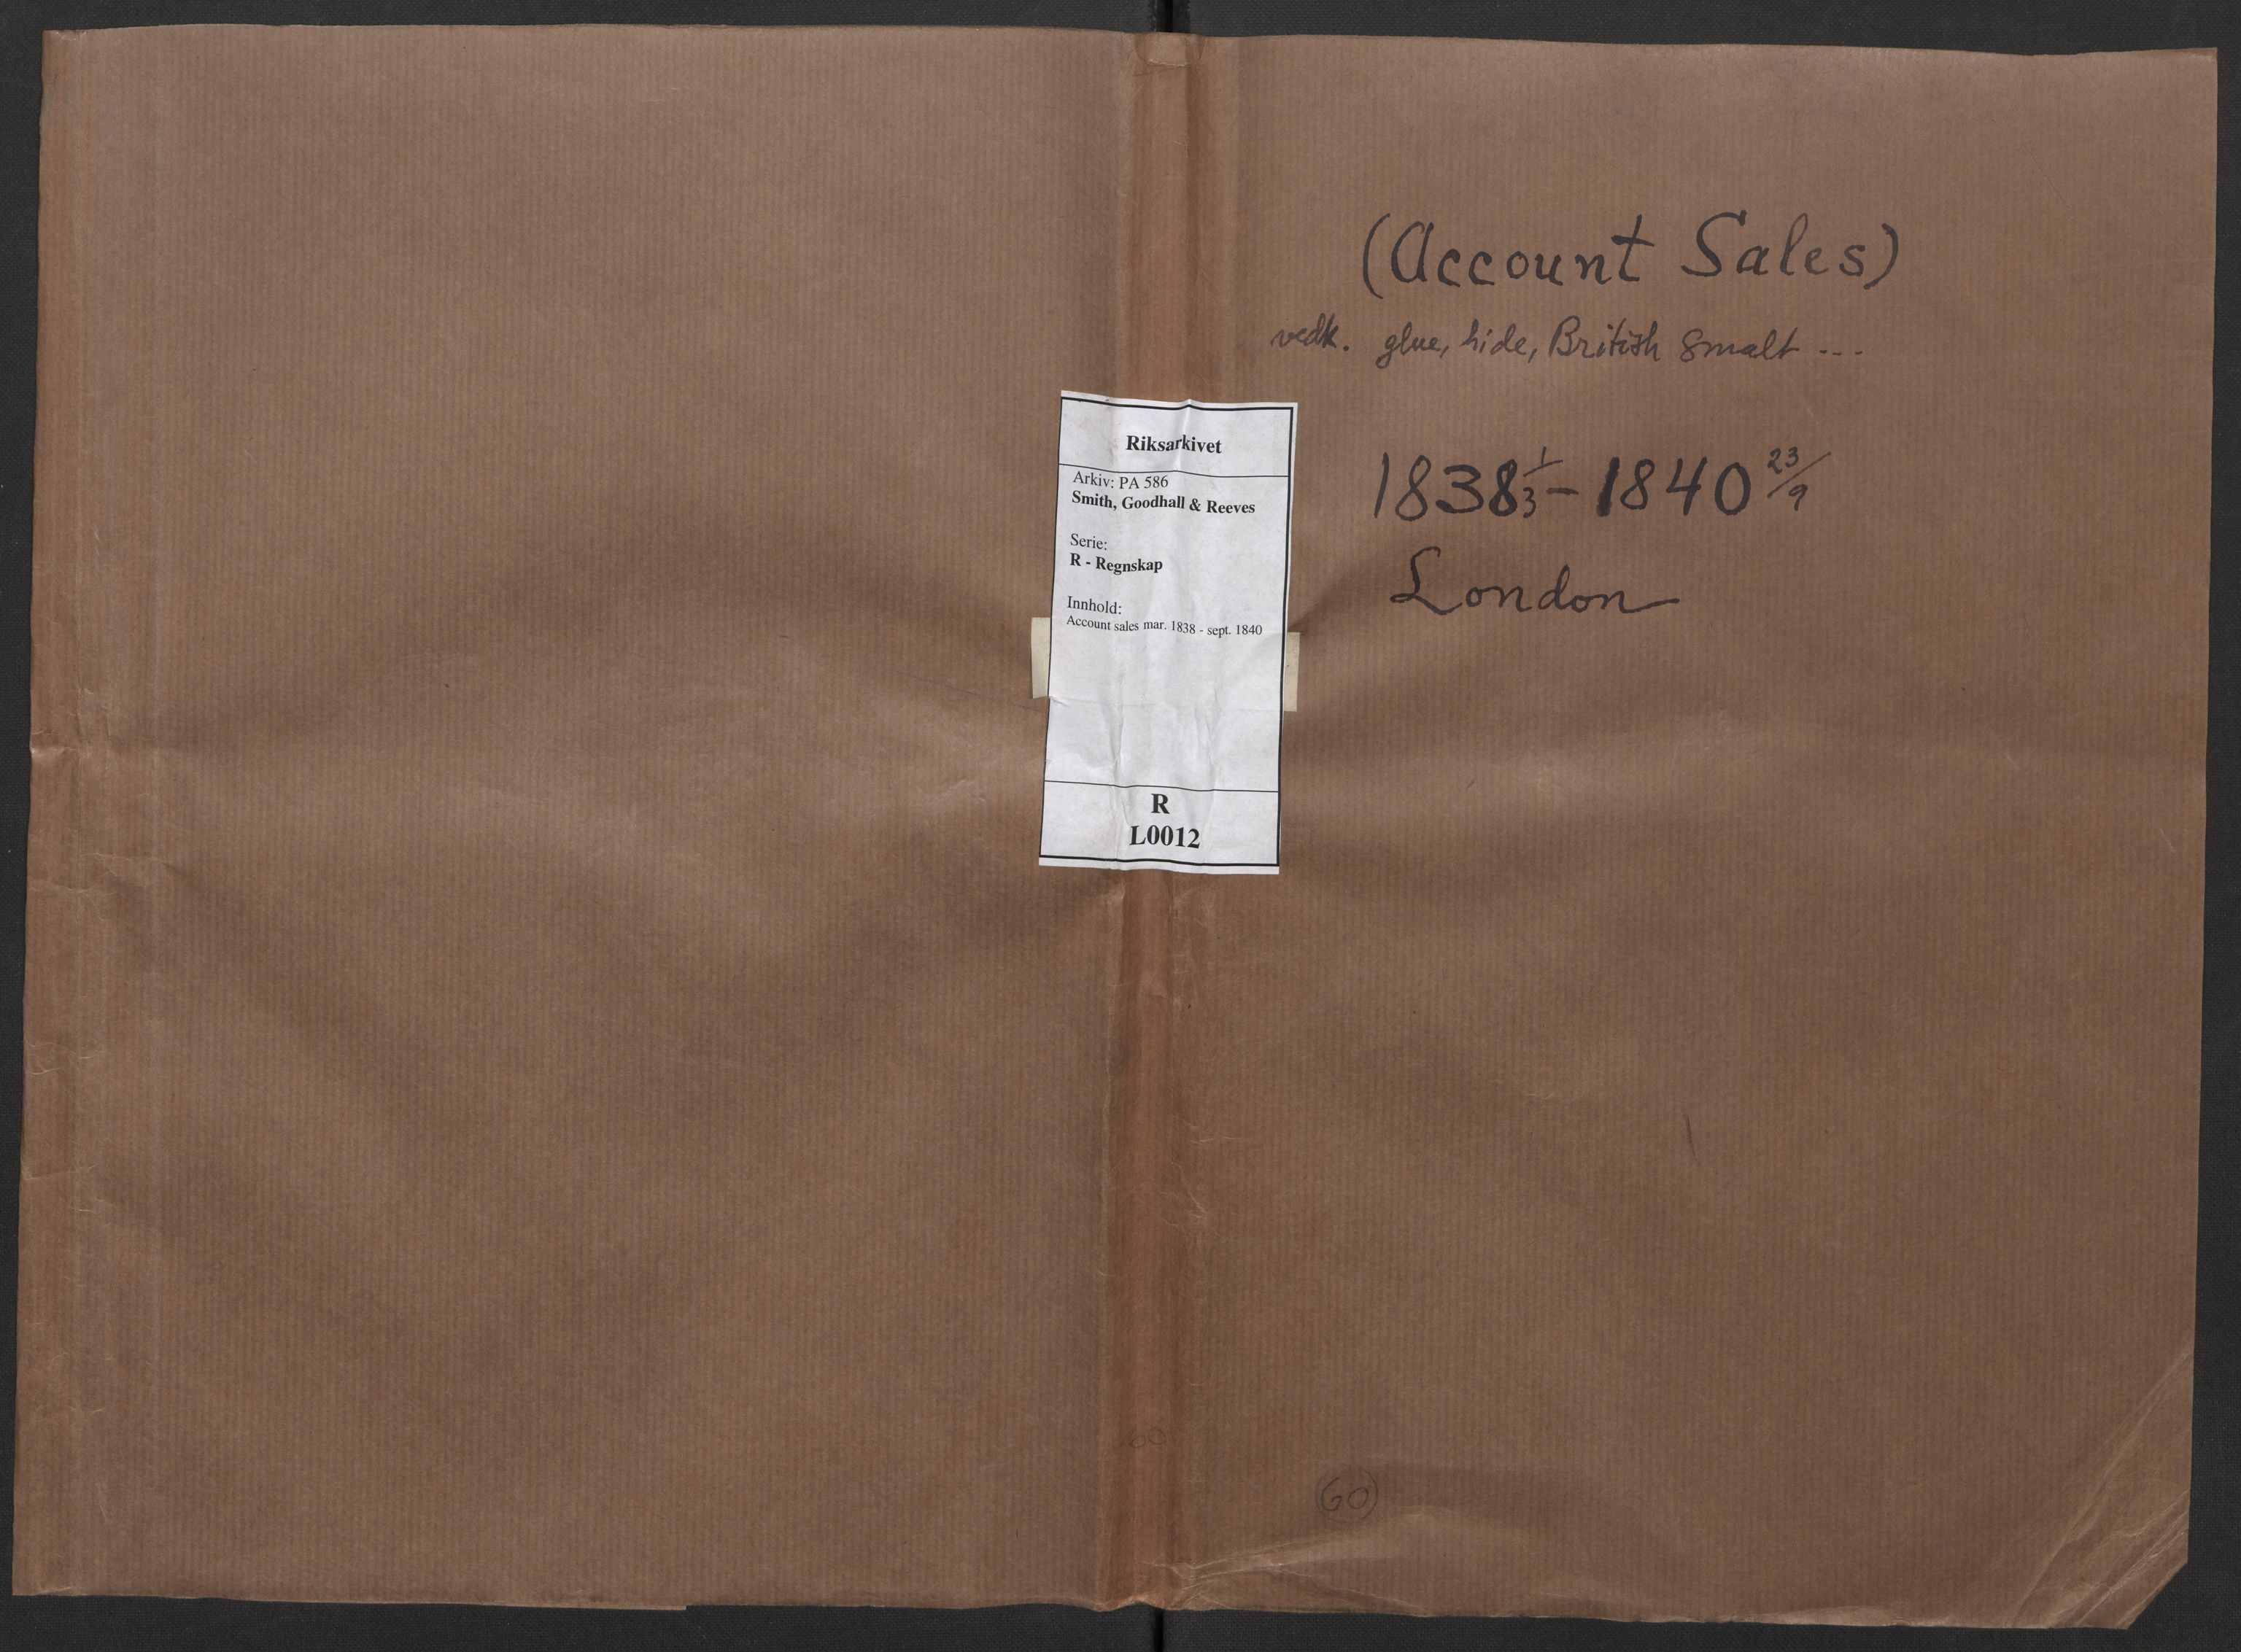 Smith, Goodhall & Reeves, RA/PA-0586/R/L0012: Account sales, 1838-1840